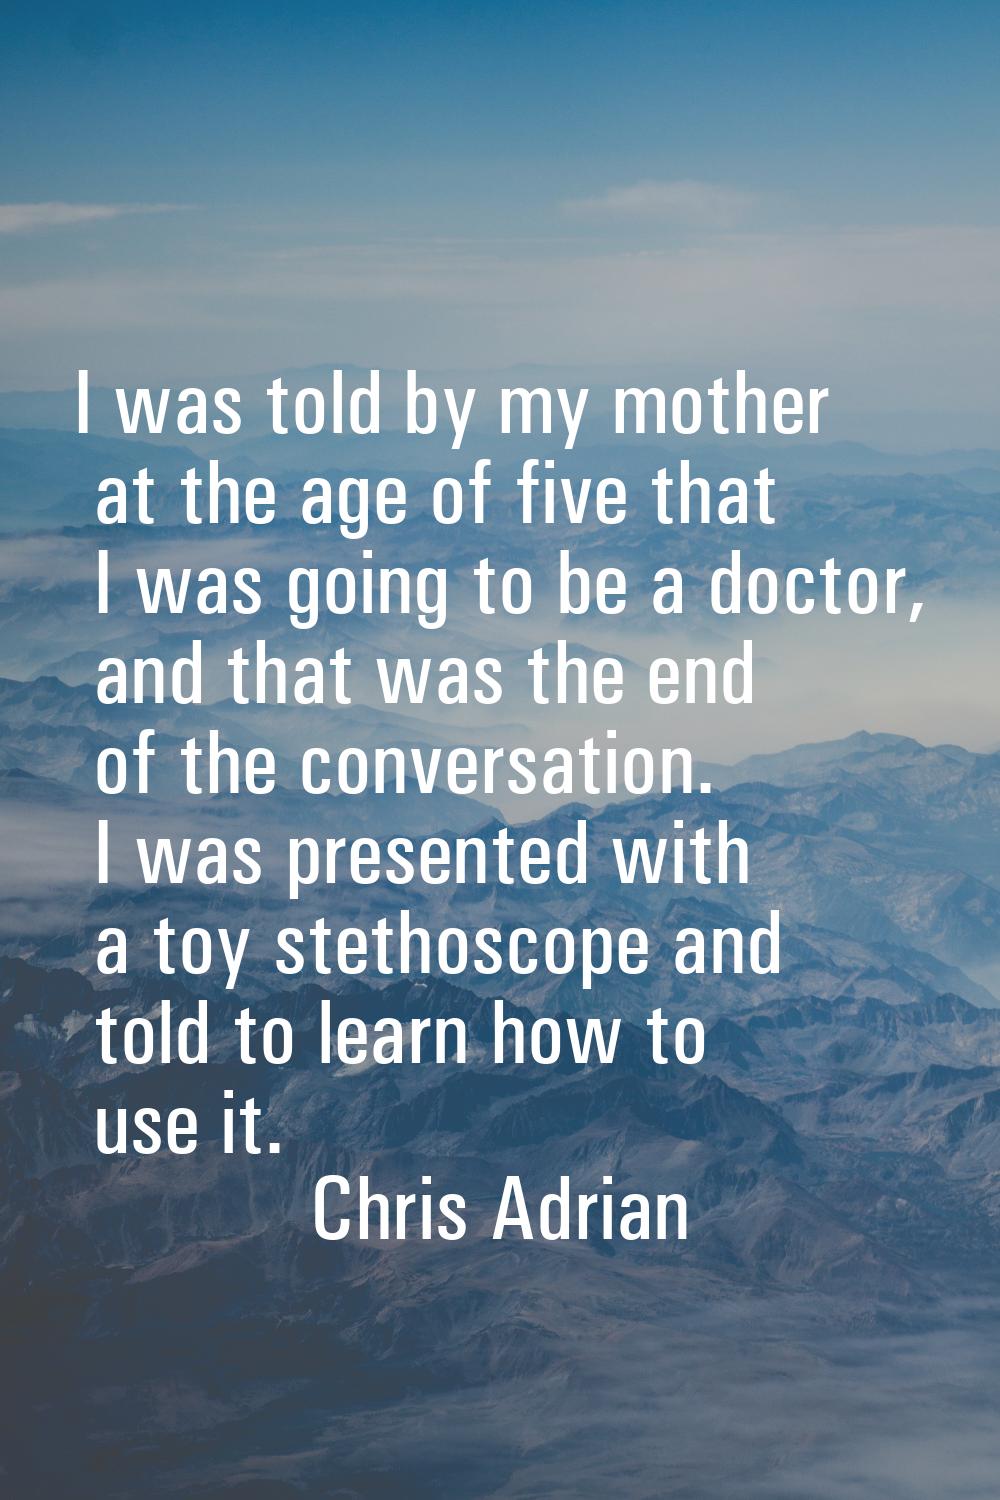 I was told by my mother at the age of five that I was going to be a doctor, and that was the end of